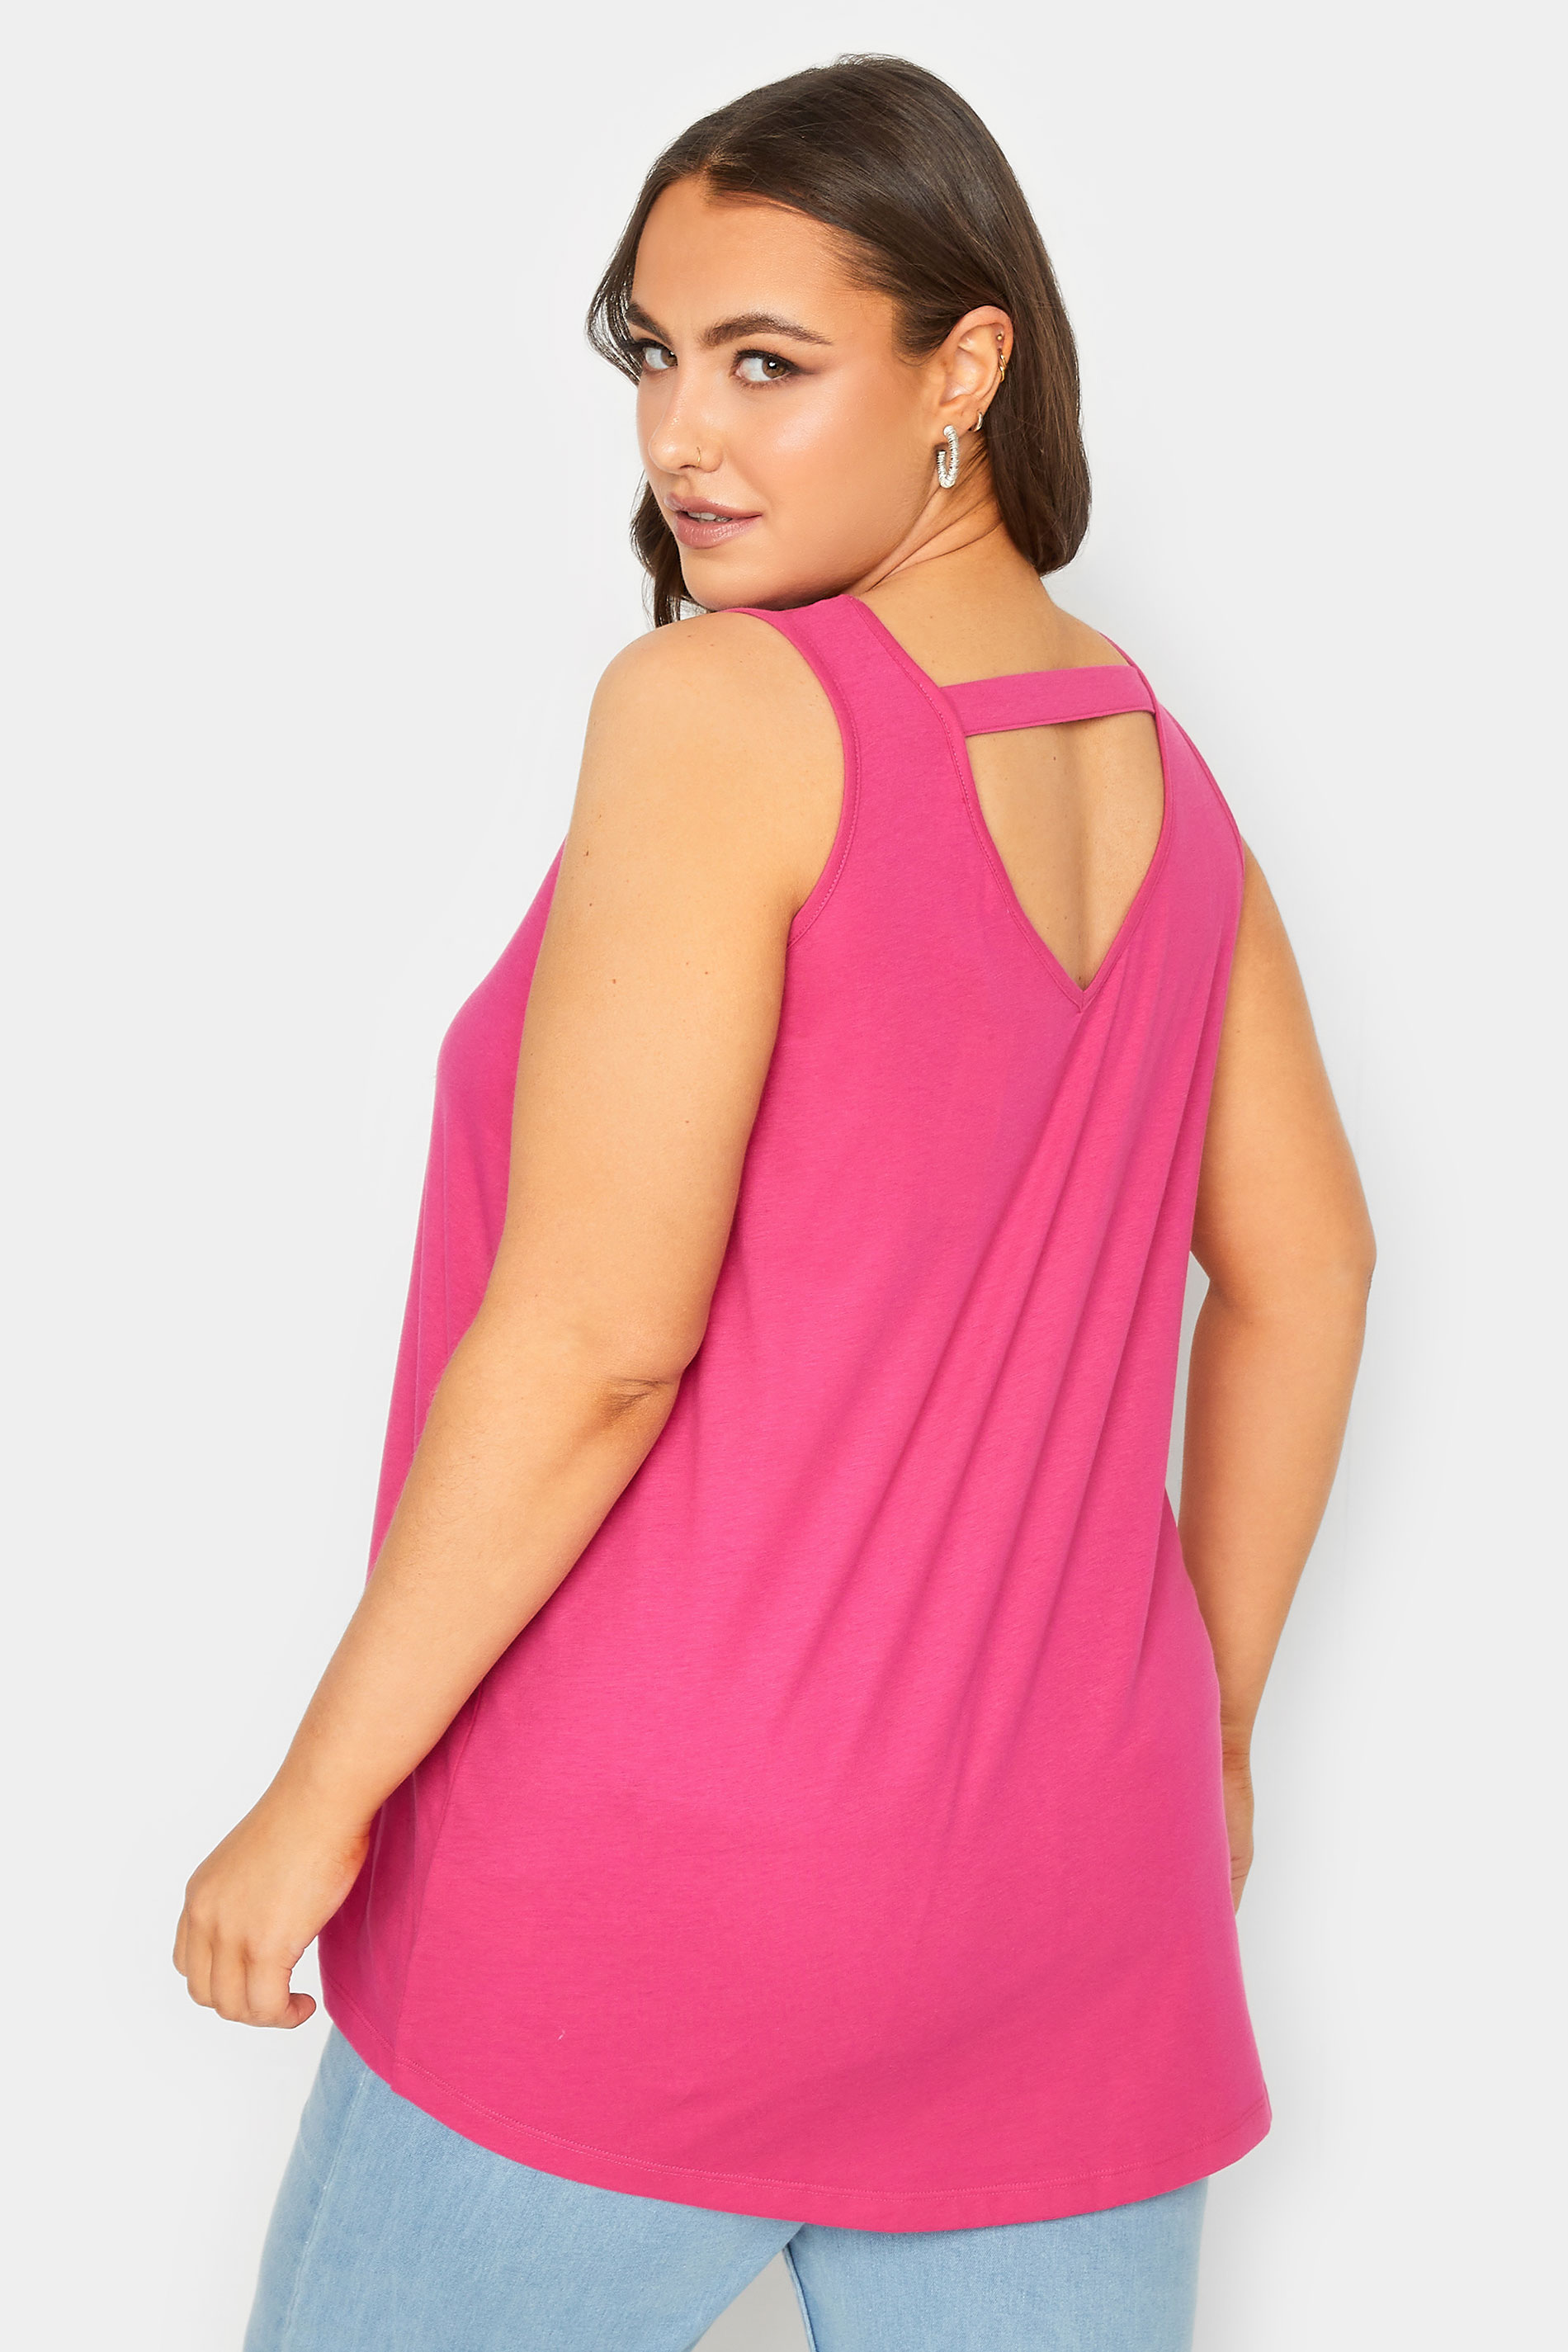 YOURS Plus Size Curve Hot Pink Bar Back Vest Top | Yours Clothing  3